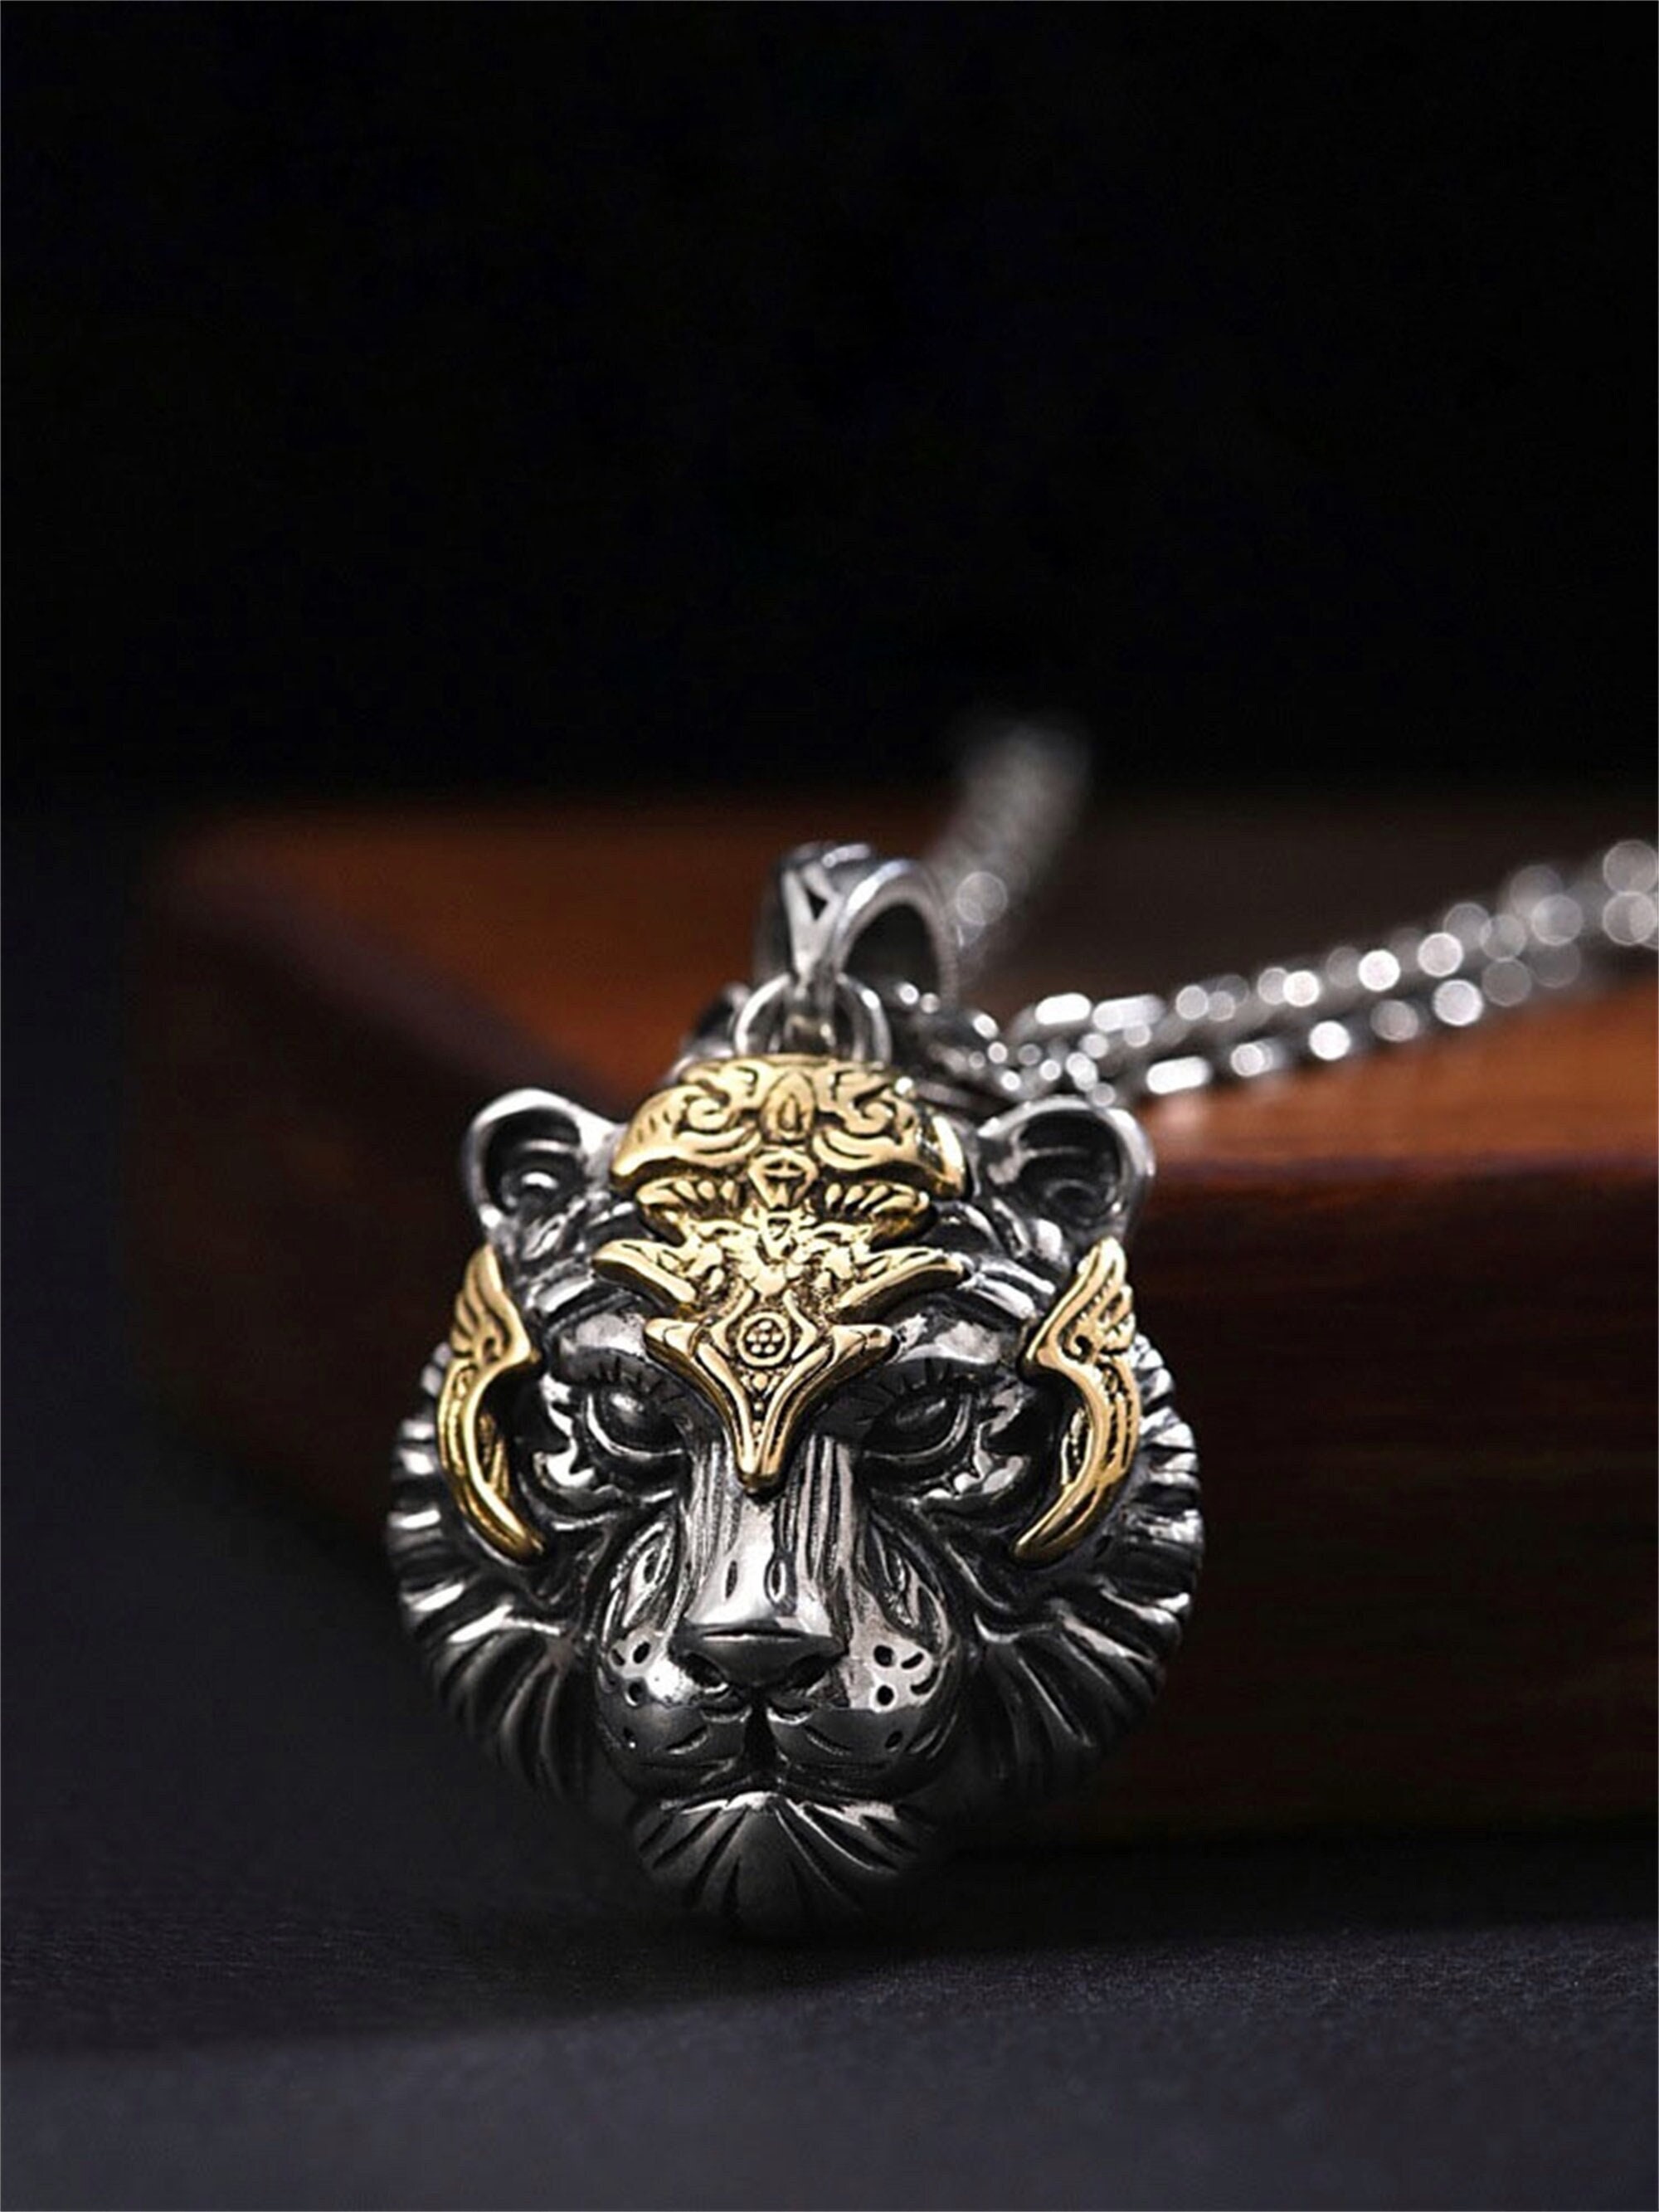  locket necklace Tiger, Tiger Locket Jewelry, Tiger Pendant,Tiger  Gift, Tiger Charm, Animal Necklace: Clothing, Shoes & Jewelry